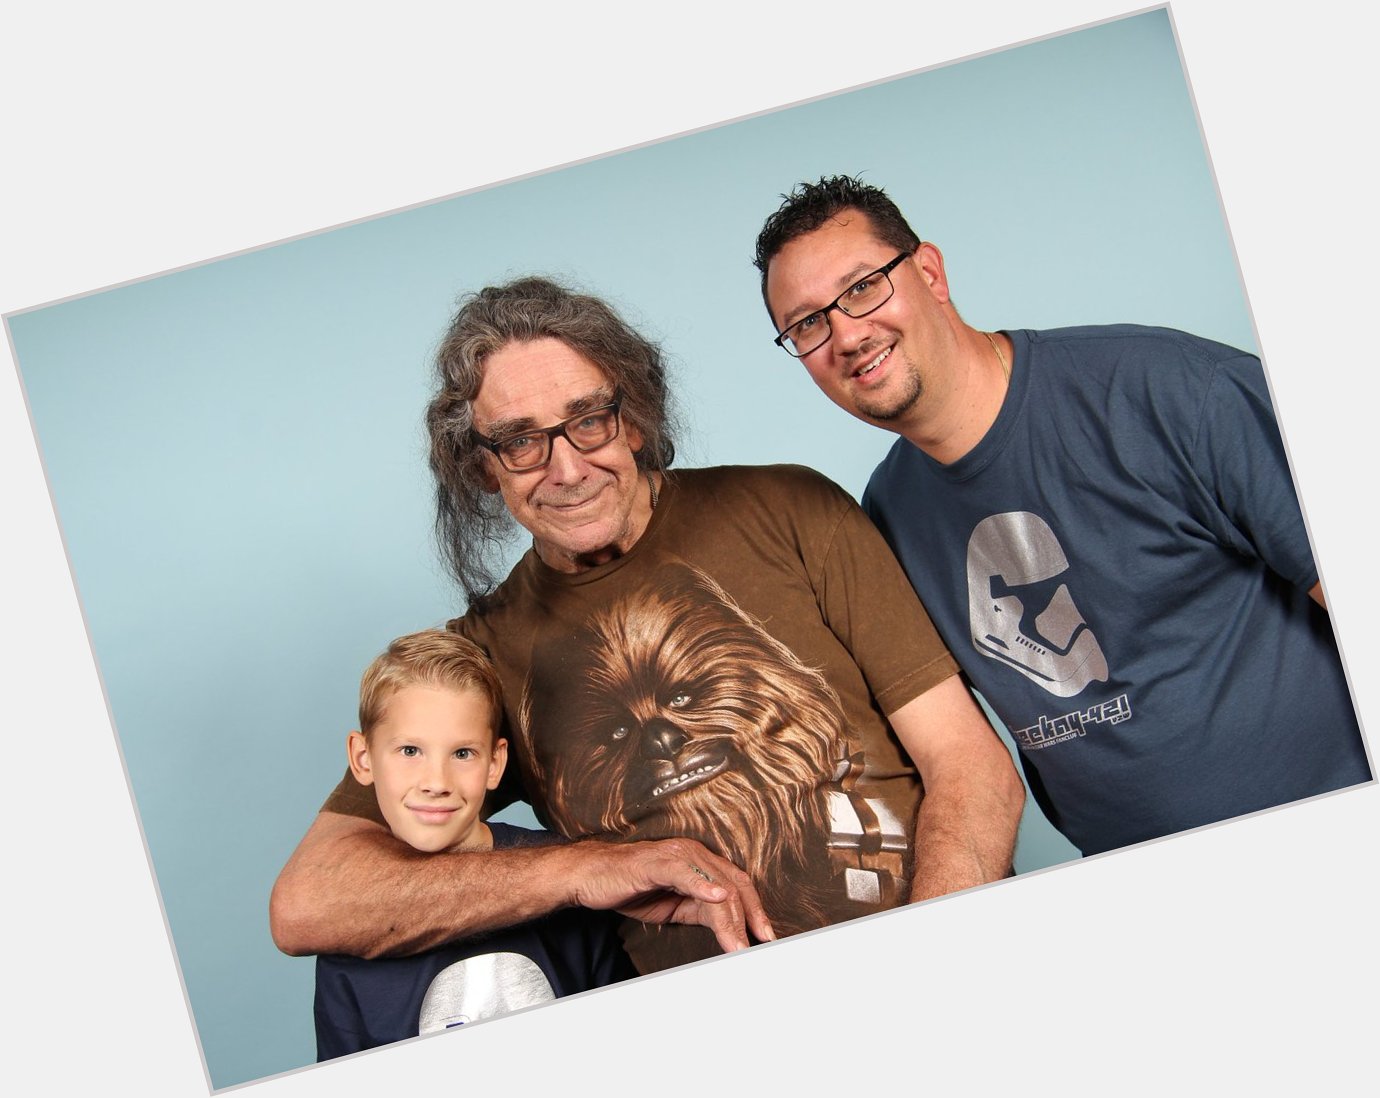 Happy Birthday Peter Mayhew, I honored to meet you!    